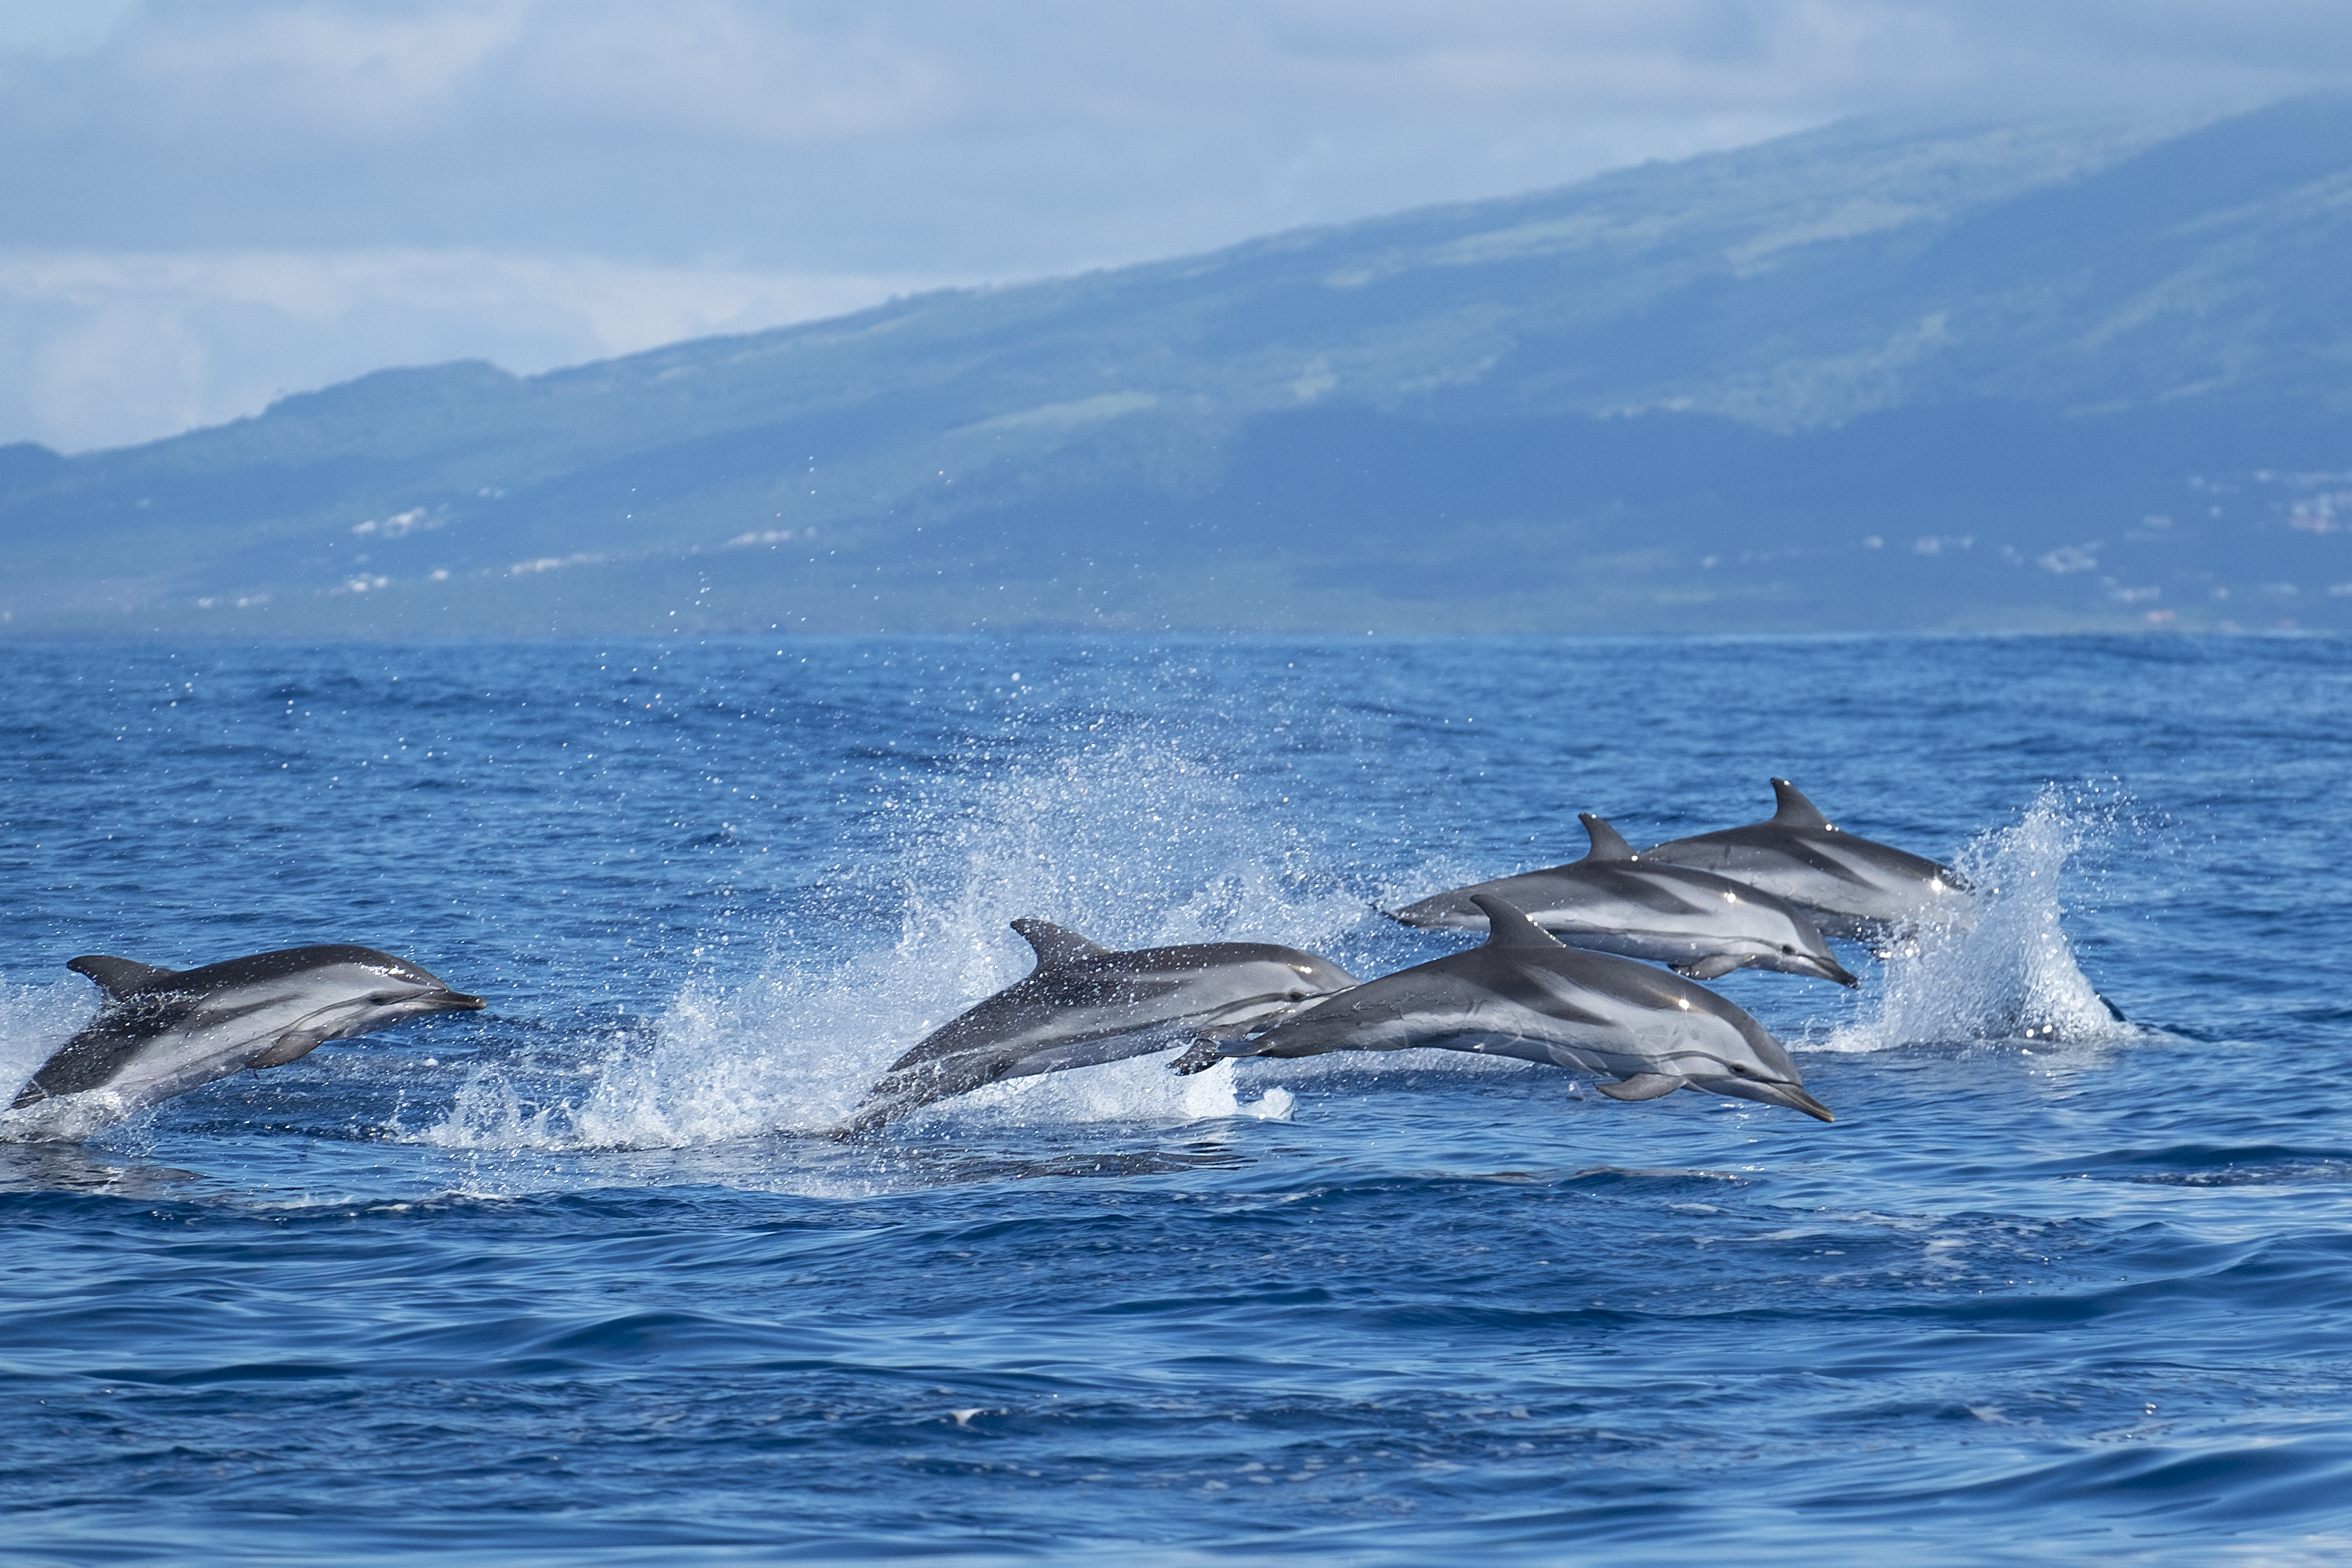 Atlantic striped dolphins near the Azores